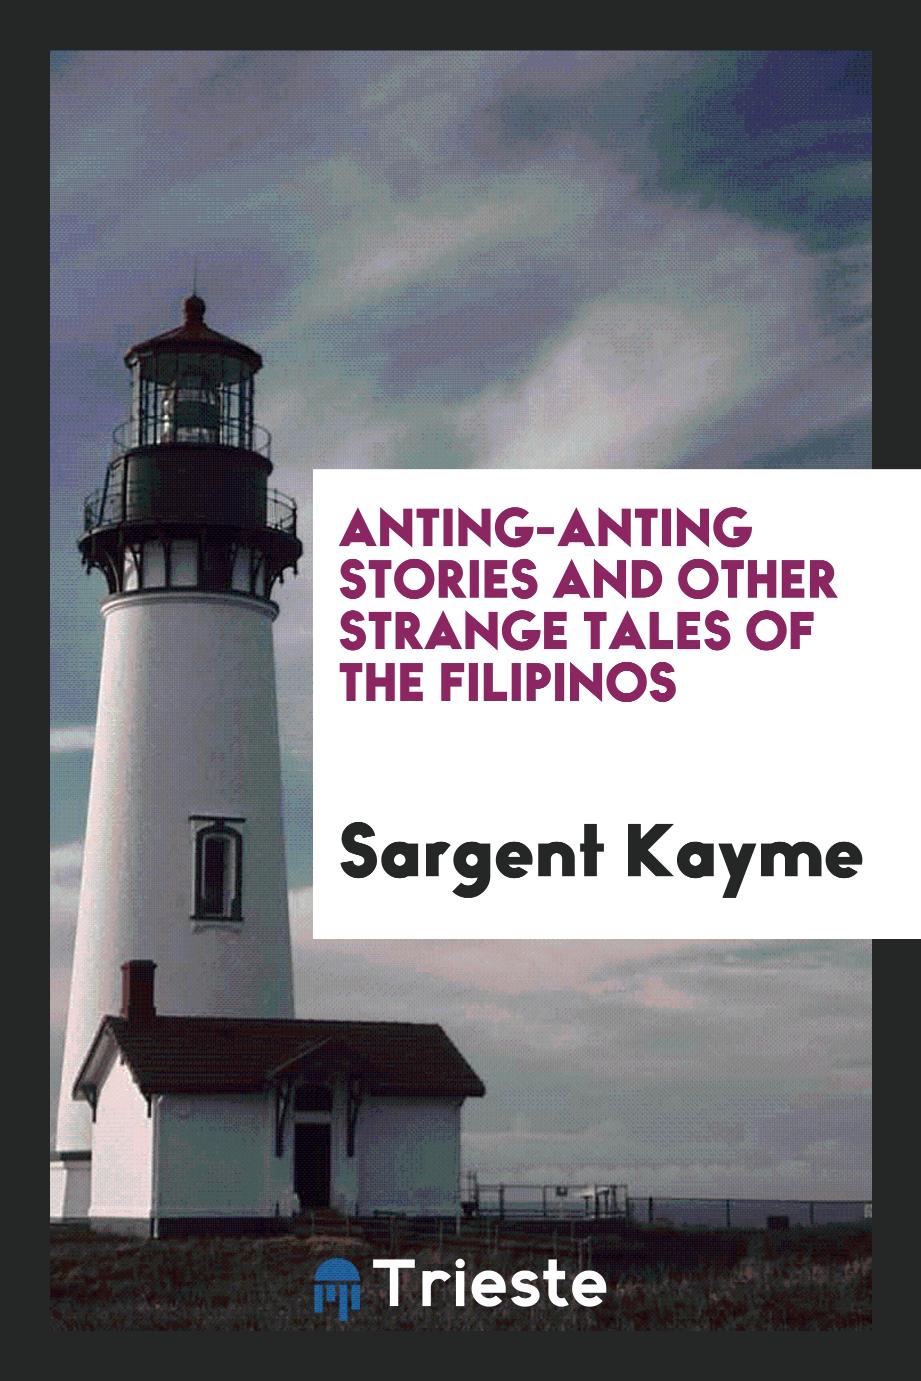 Anting-anting stories and other strange tales of the Filipinos